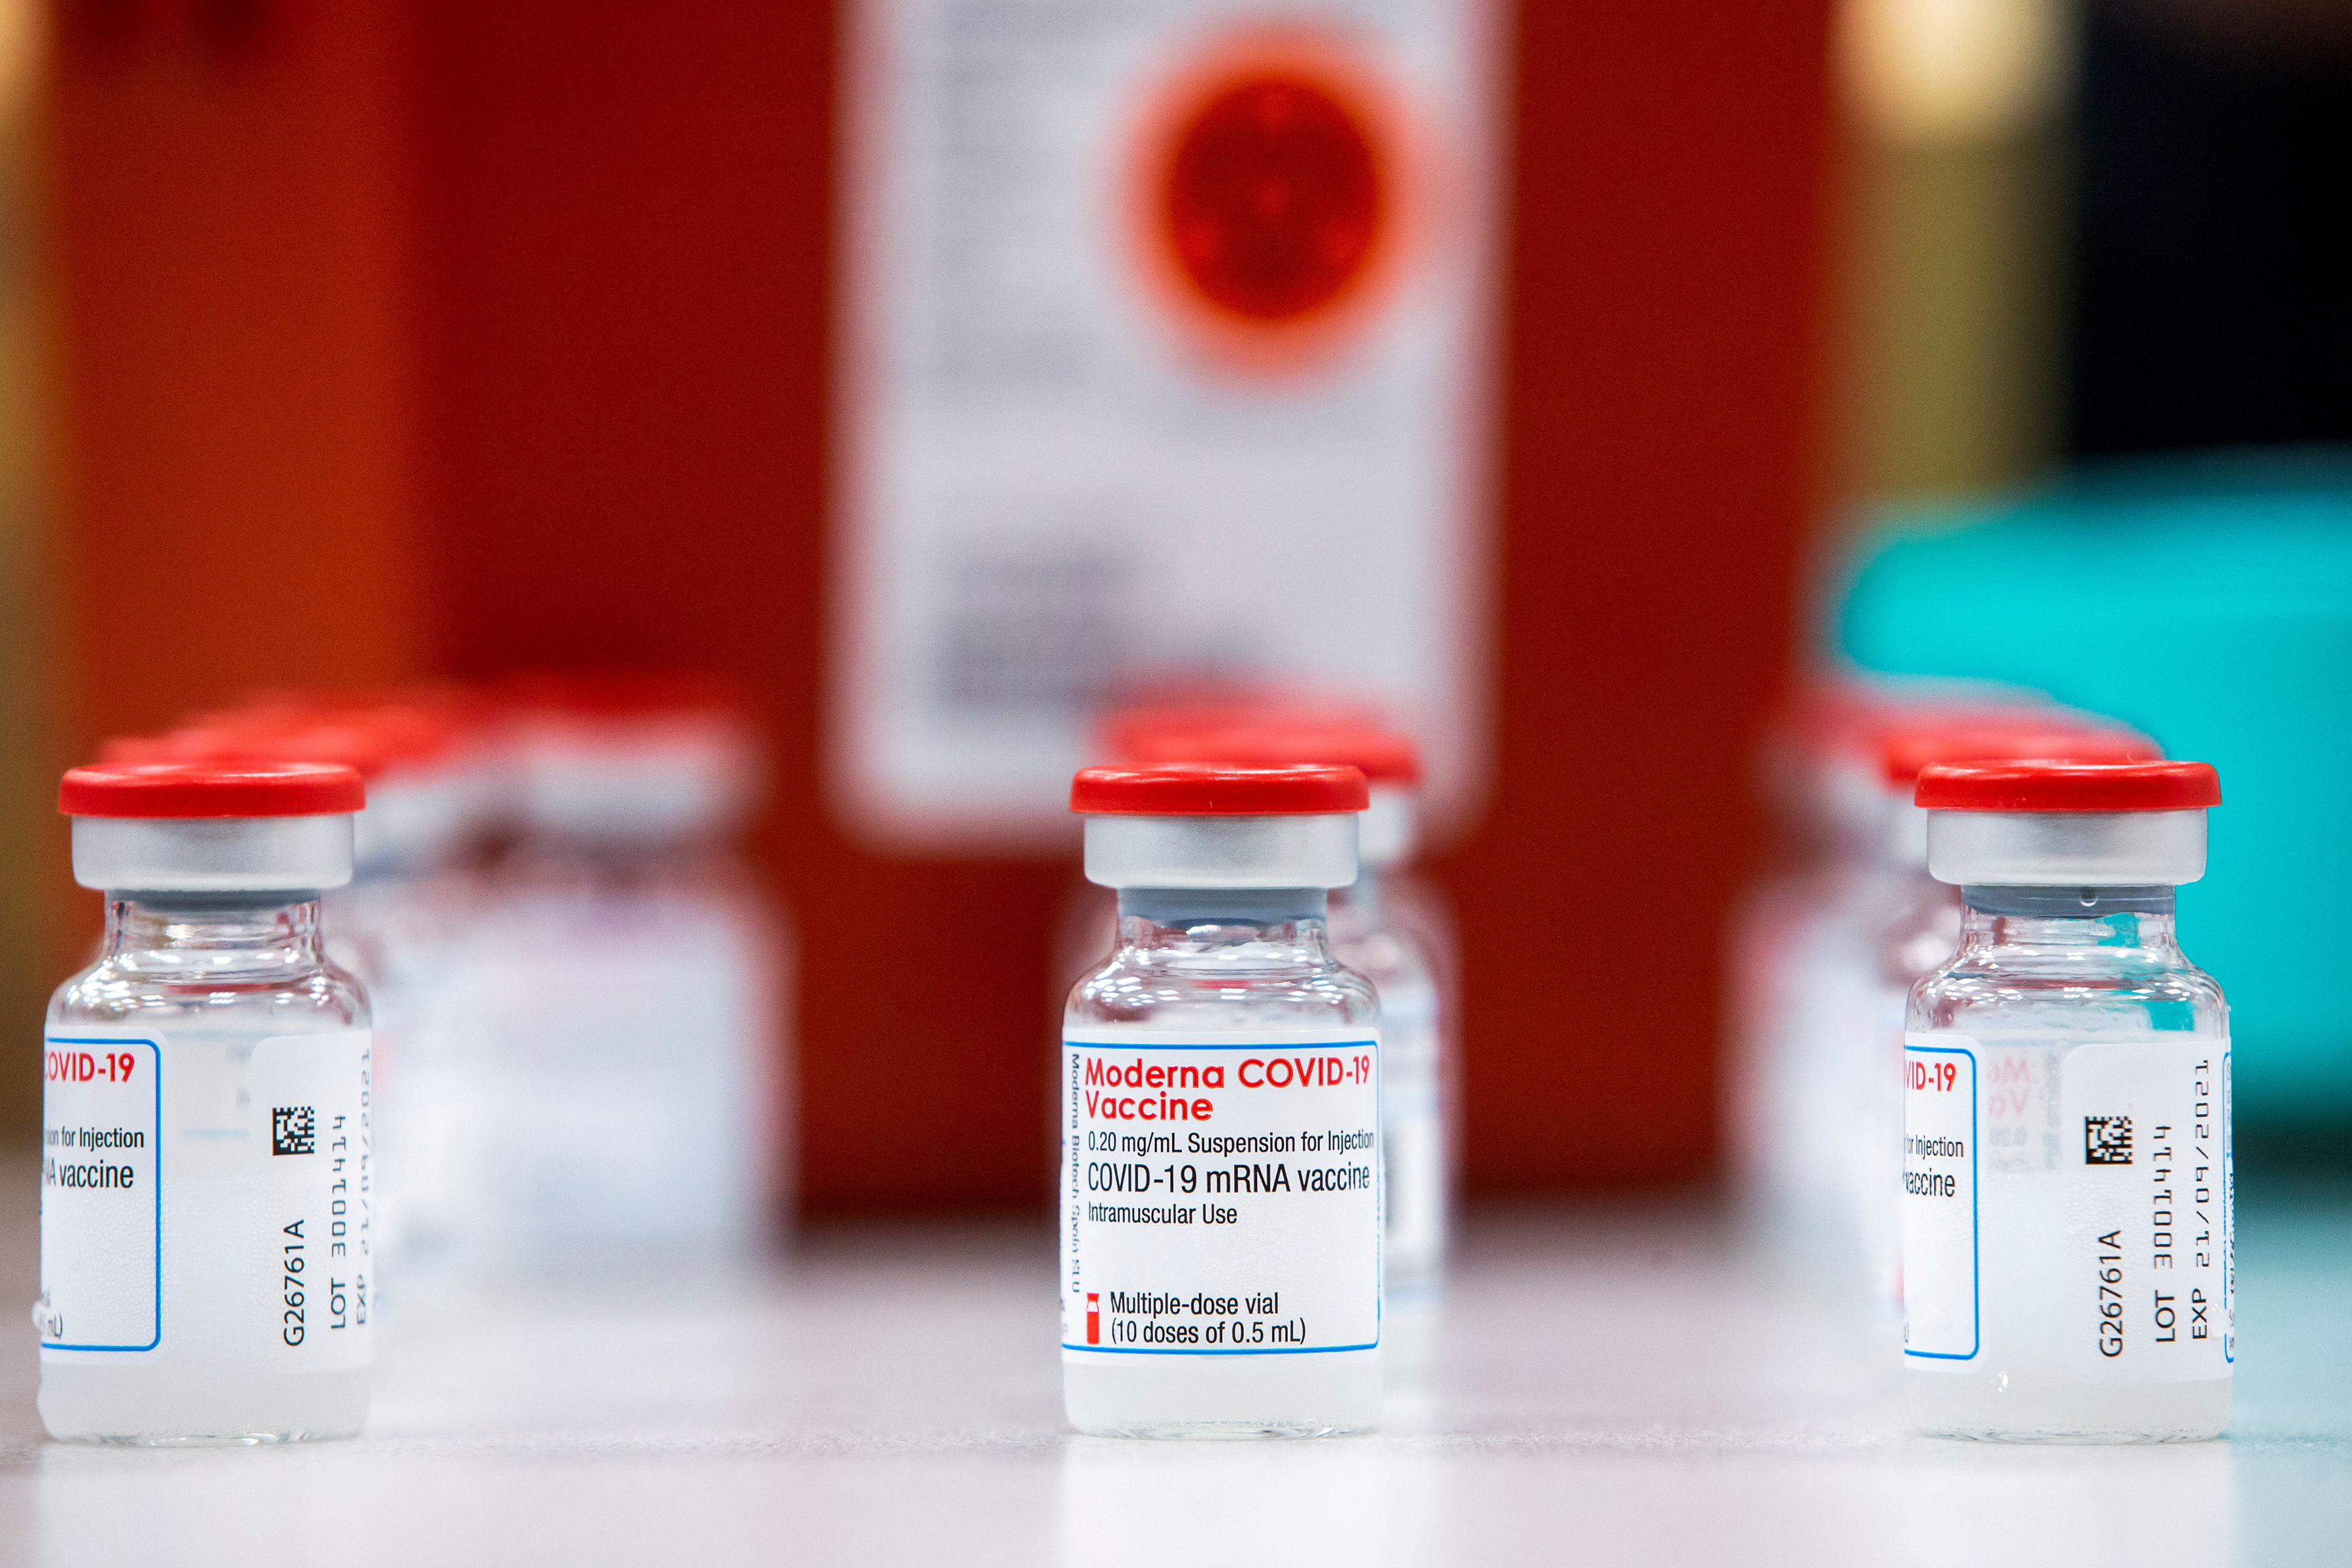 Vials of the Moderna COVID-19 vaccine are seen at Apotex pharmaceutical company in Toronto